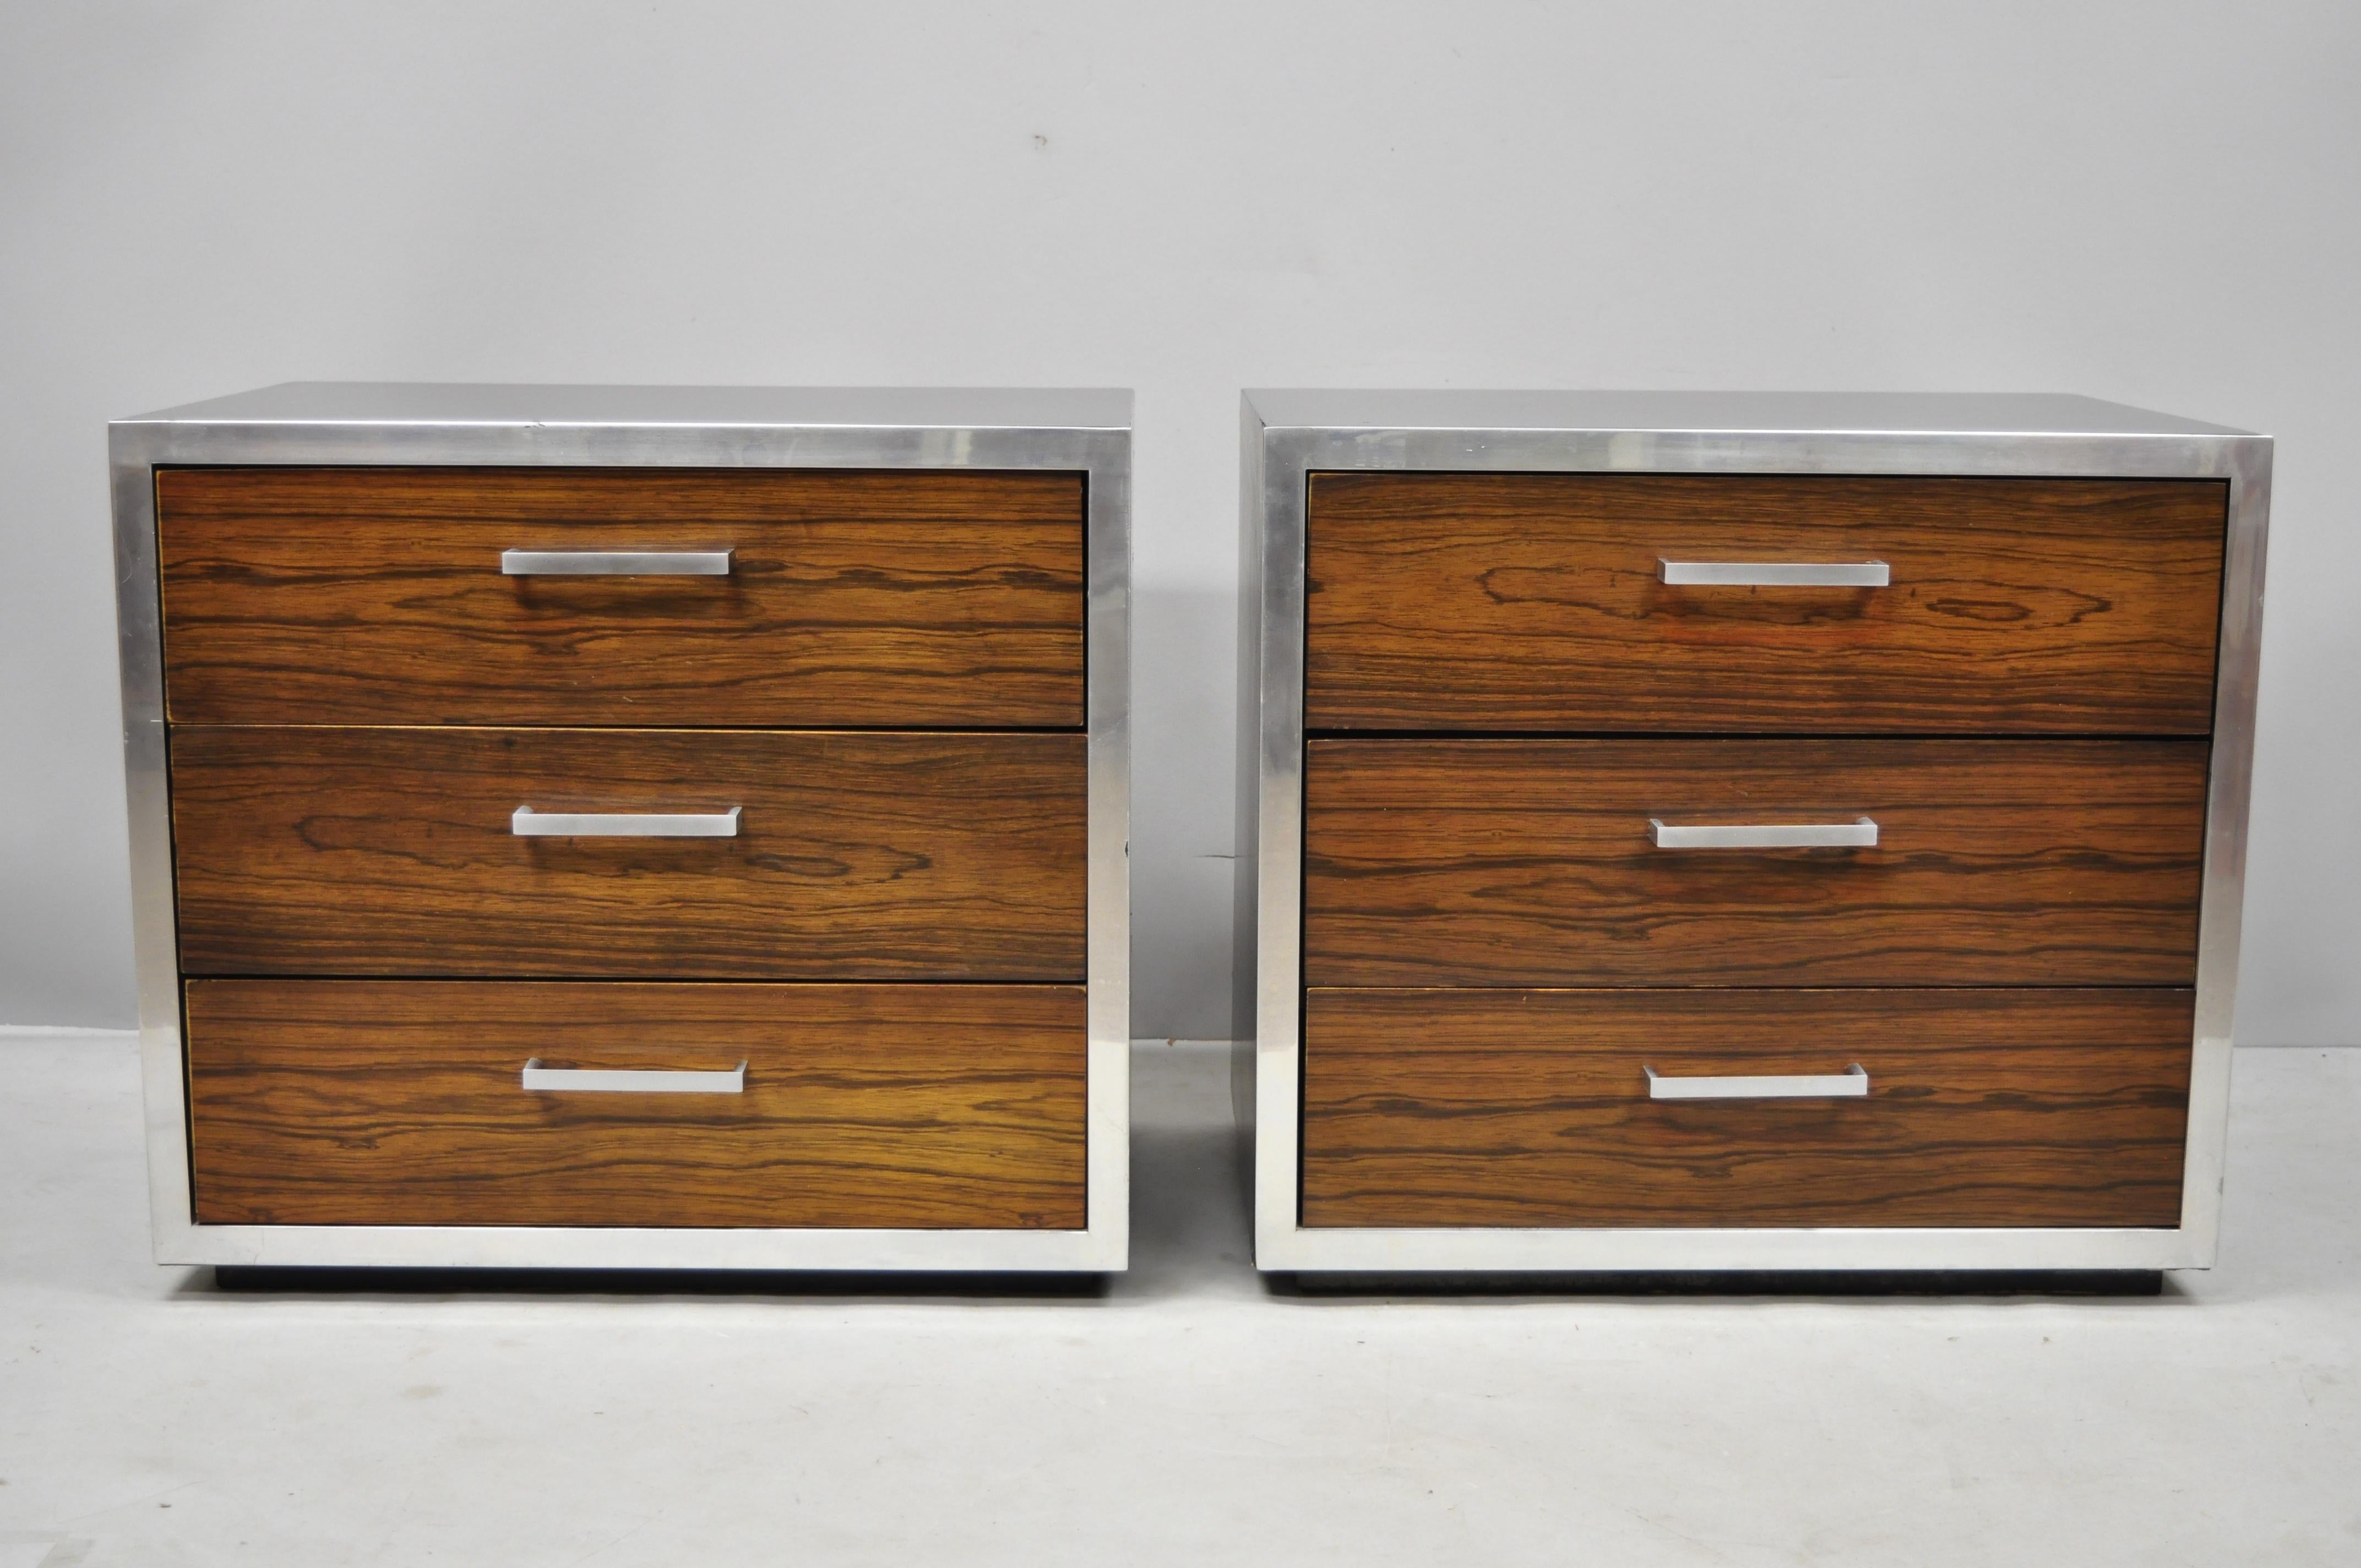 Pair of Mid-Century Modern rosewood and chrome 3-drawer nightstands after Milo Baughman. Items feature chrome trim and handles, black laminate top and sides, rosewood veneer drawer fronts, 3 dovetailed drawers, clean modernist lines, great style and